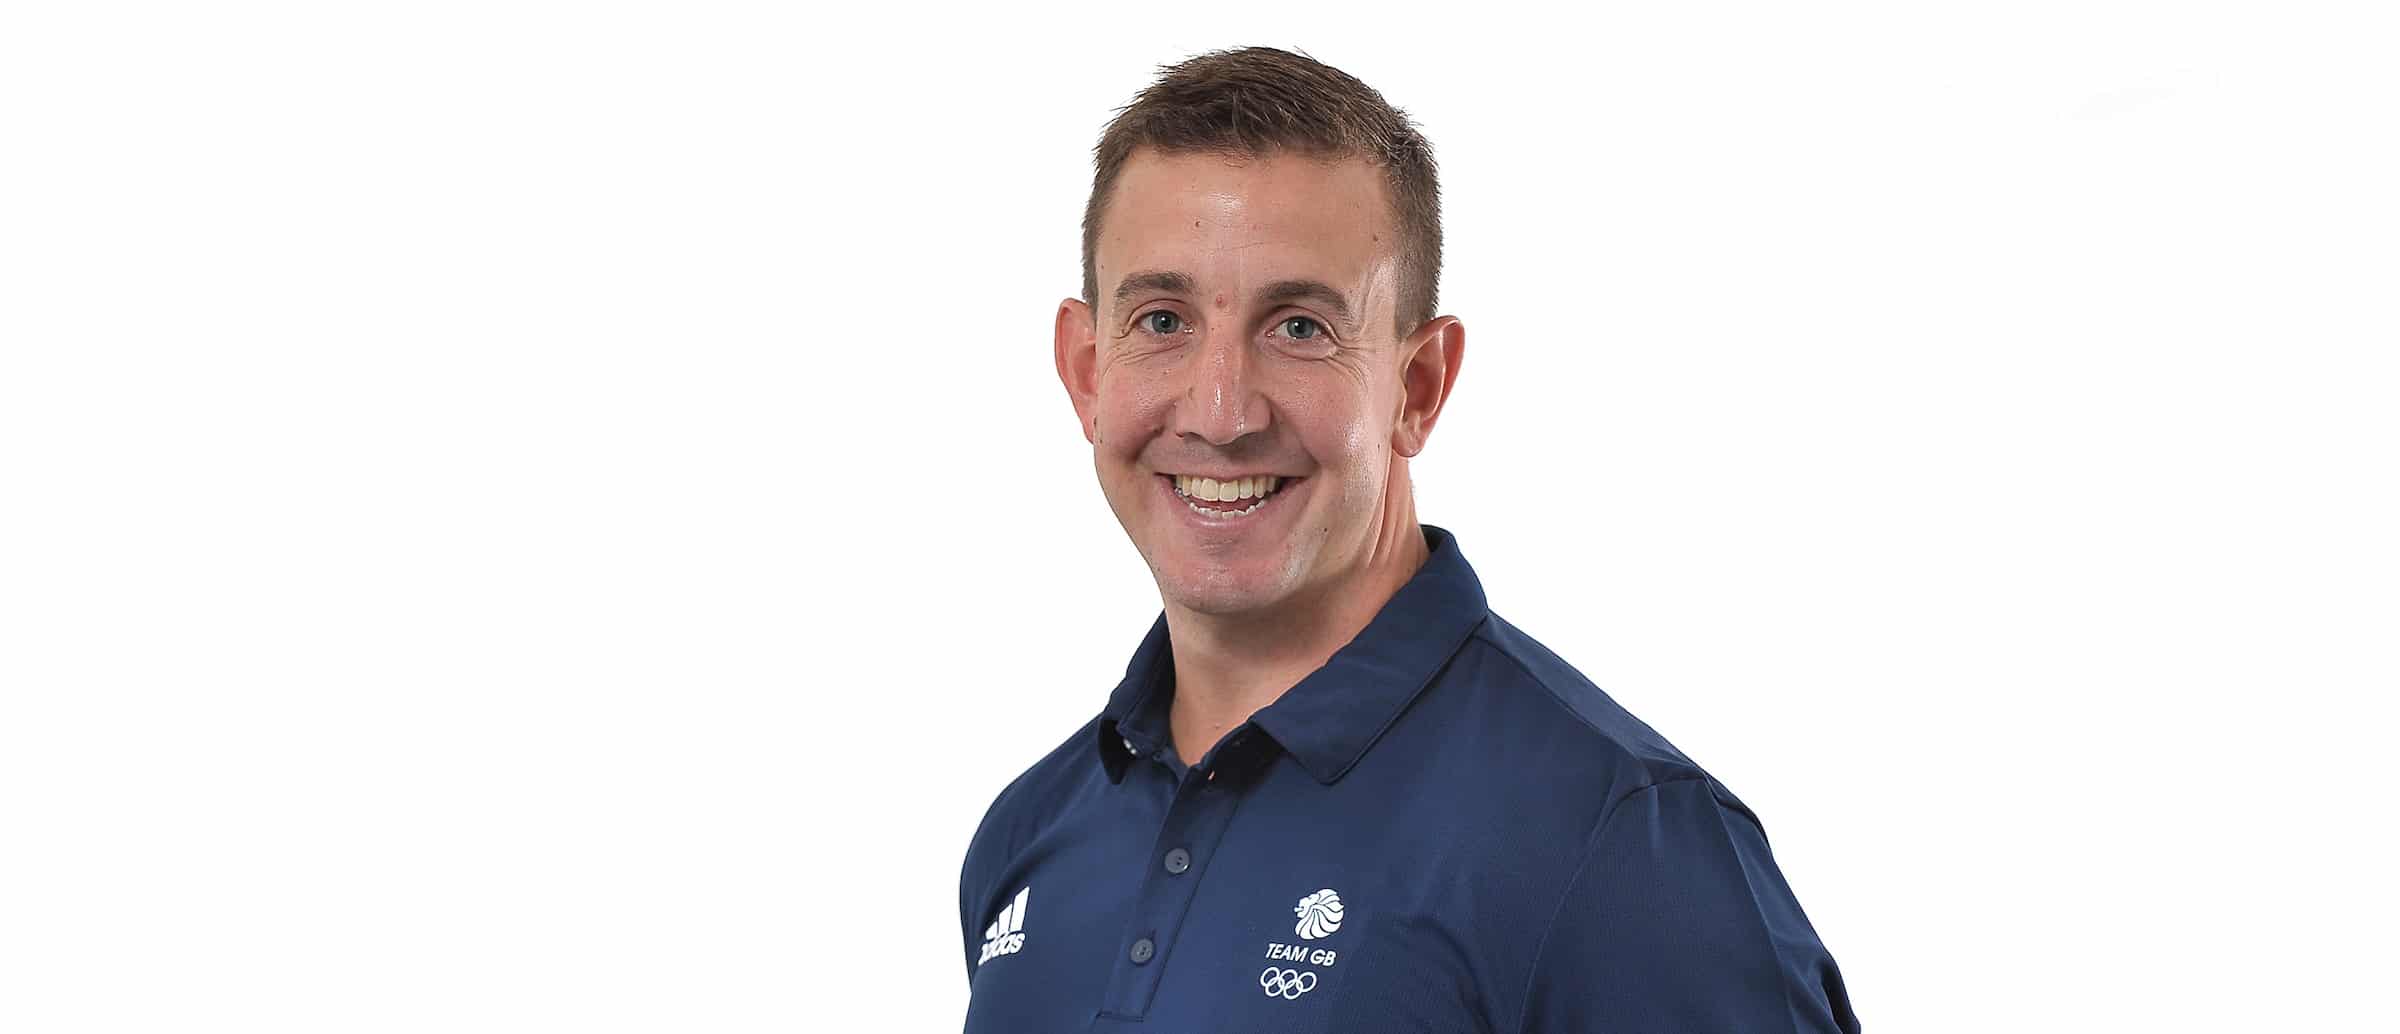 Dr paul ford mbe named team gb’s chef de mission for krakow 2023 european games